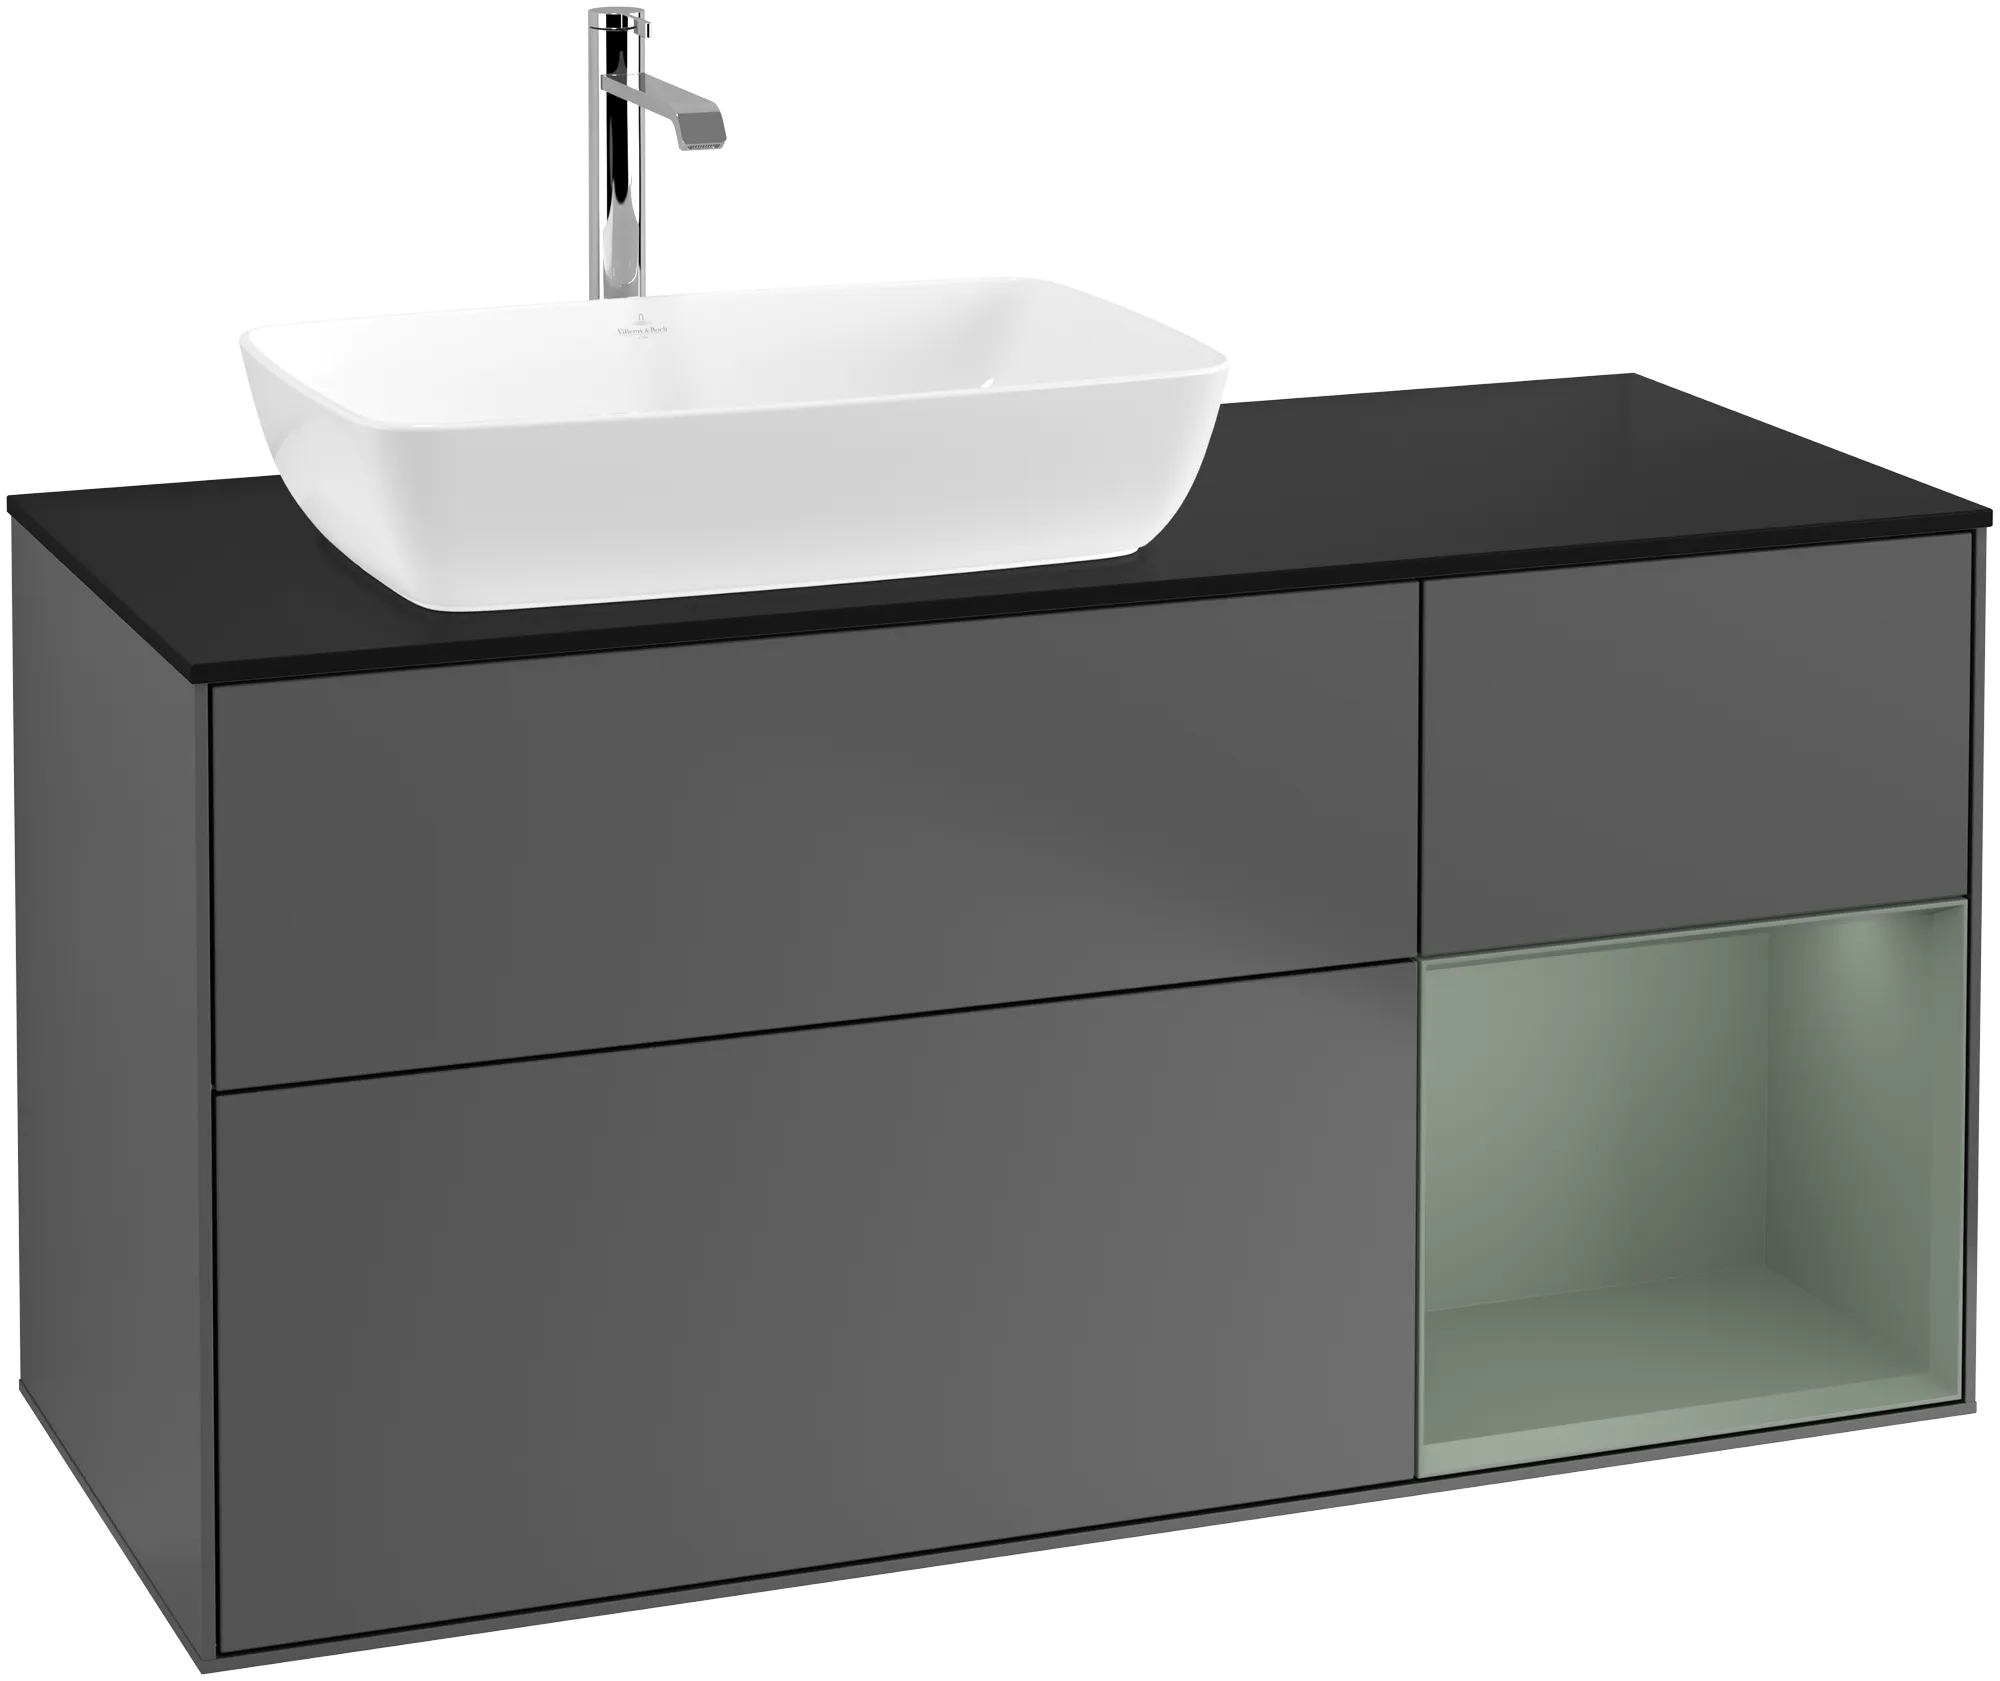 Obrázek VILLEROY BOCH Finion Vanity unit, with lighting, 3 pull-out compartments, 1200 x 603 x 501 mm, Anthracite Matt Lacquer / Olive Matt Lacquer / Glass Black Matt #G812GMGK